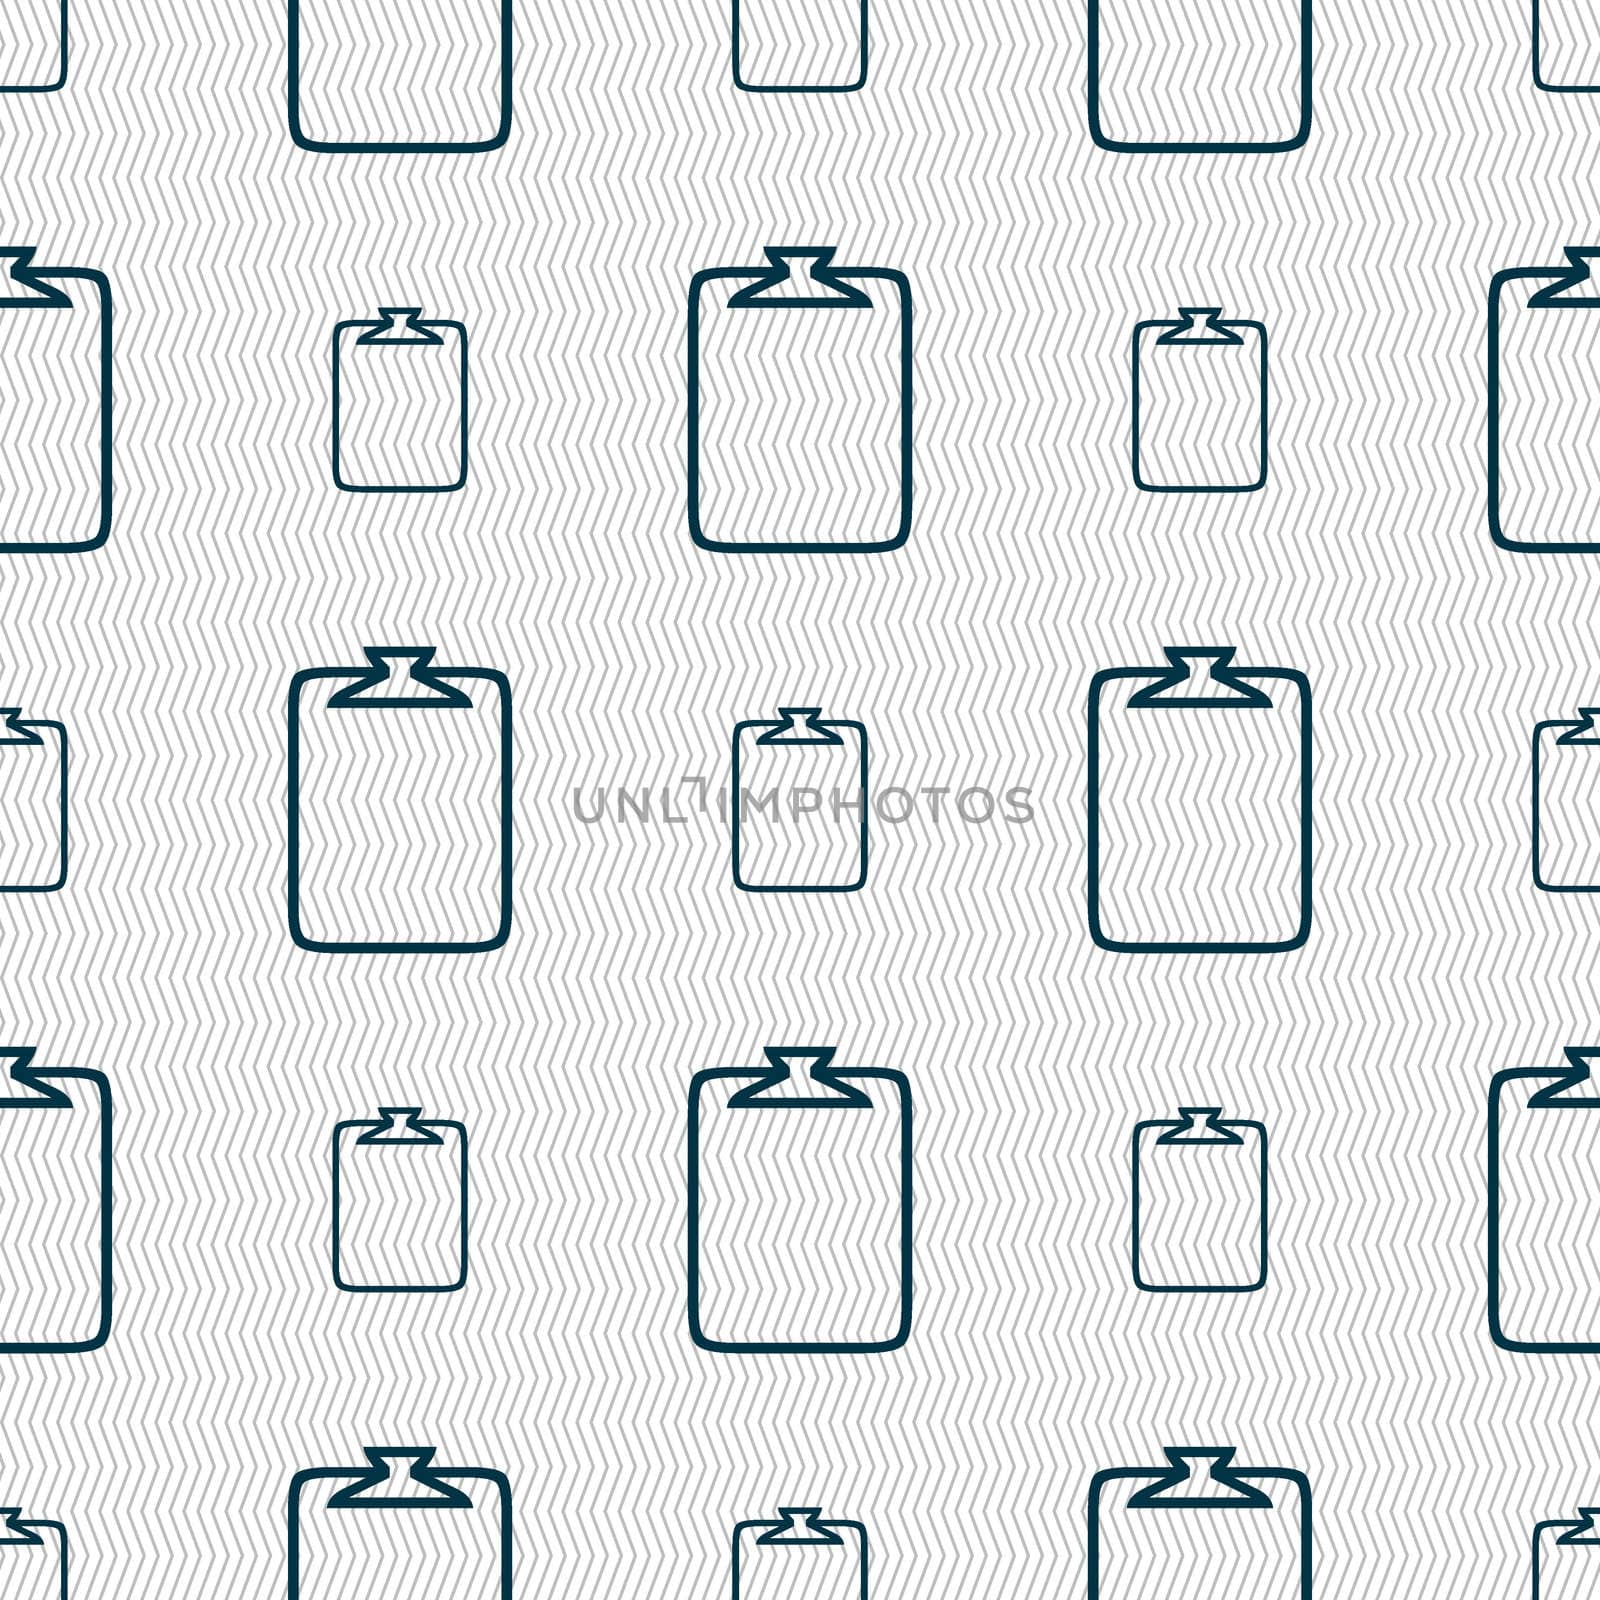 File annex icon. Paper clip symbol. Attach sign. Seamless abstract background with geometric shapes. illustration